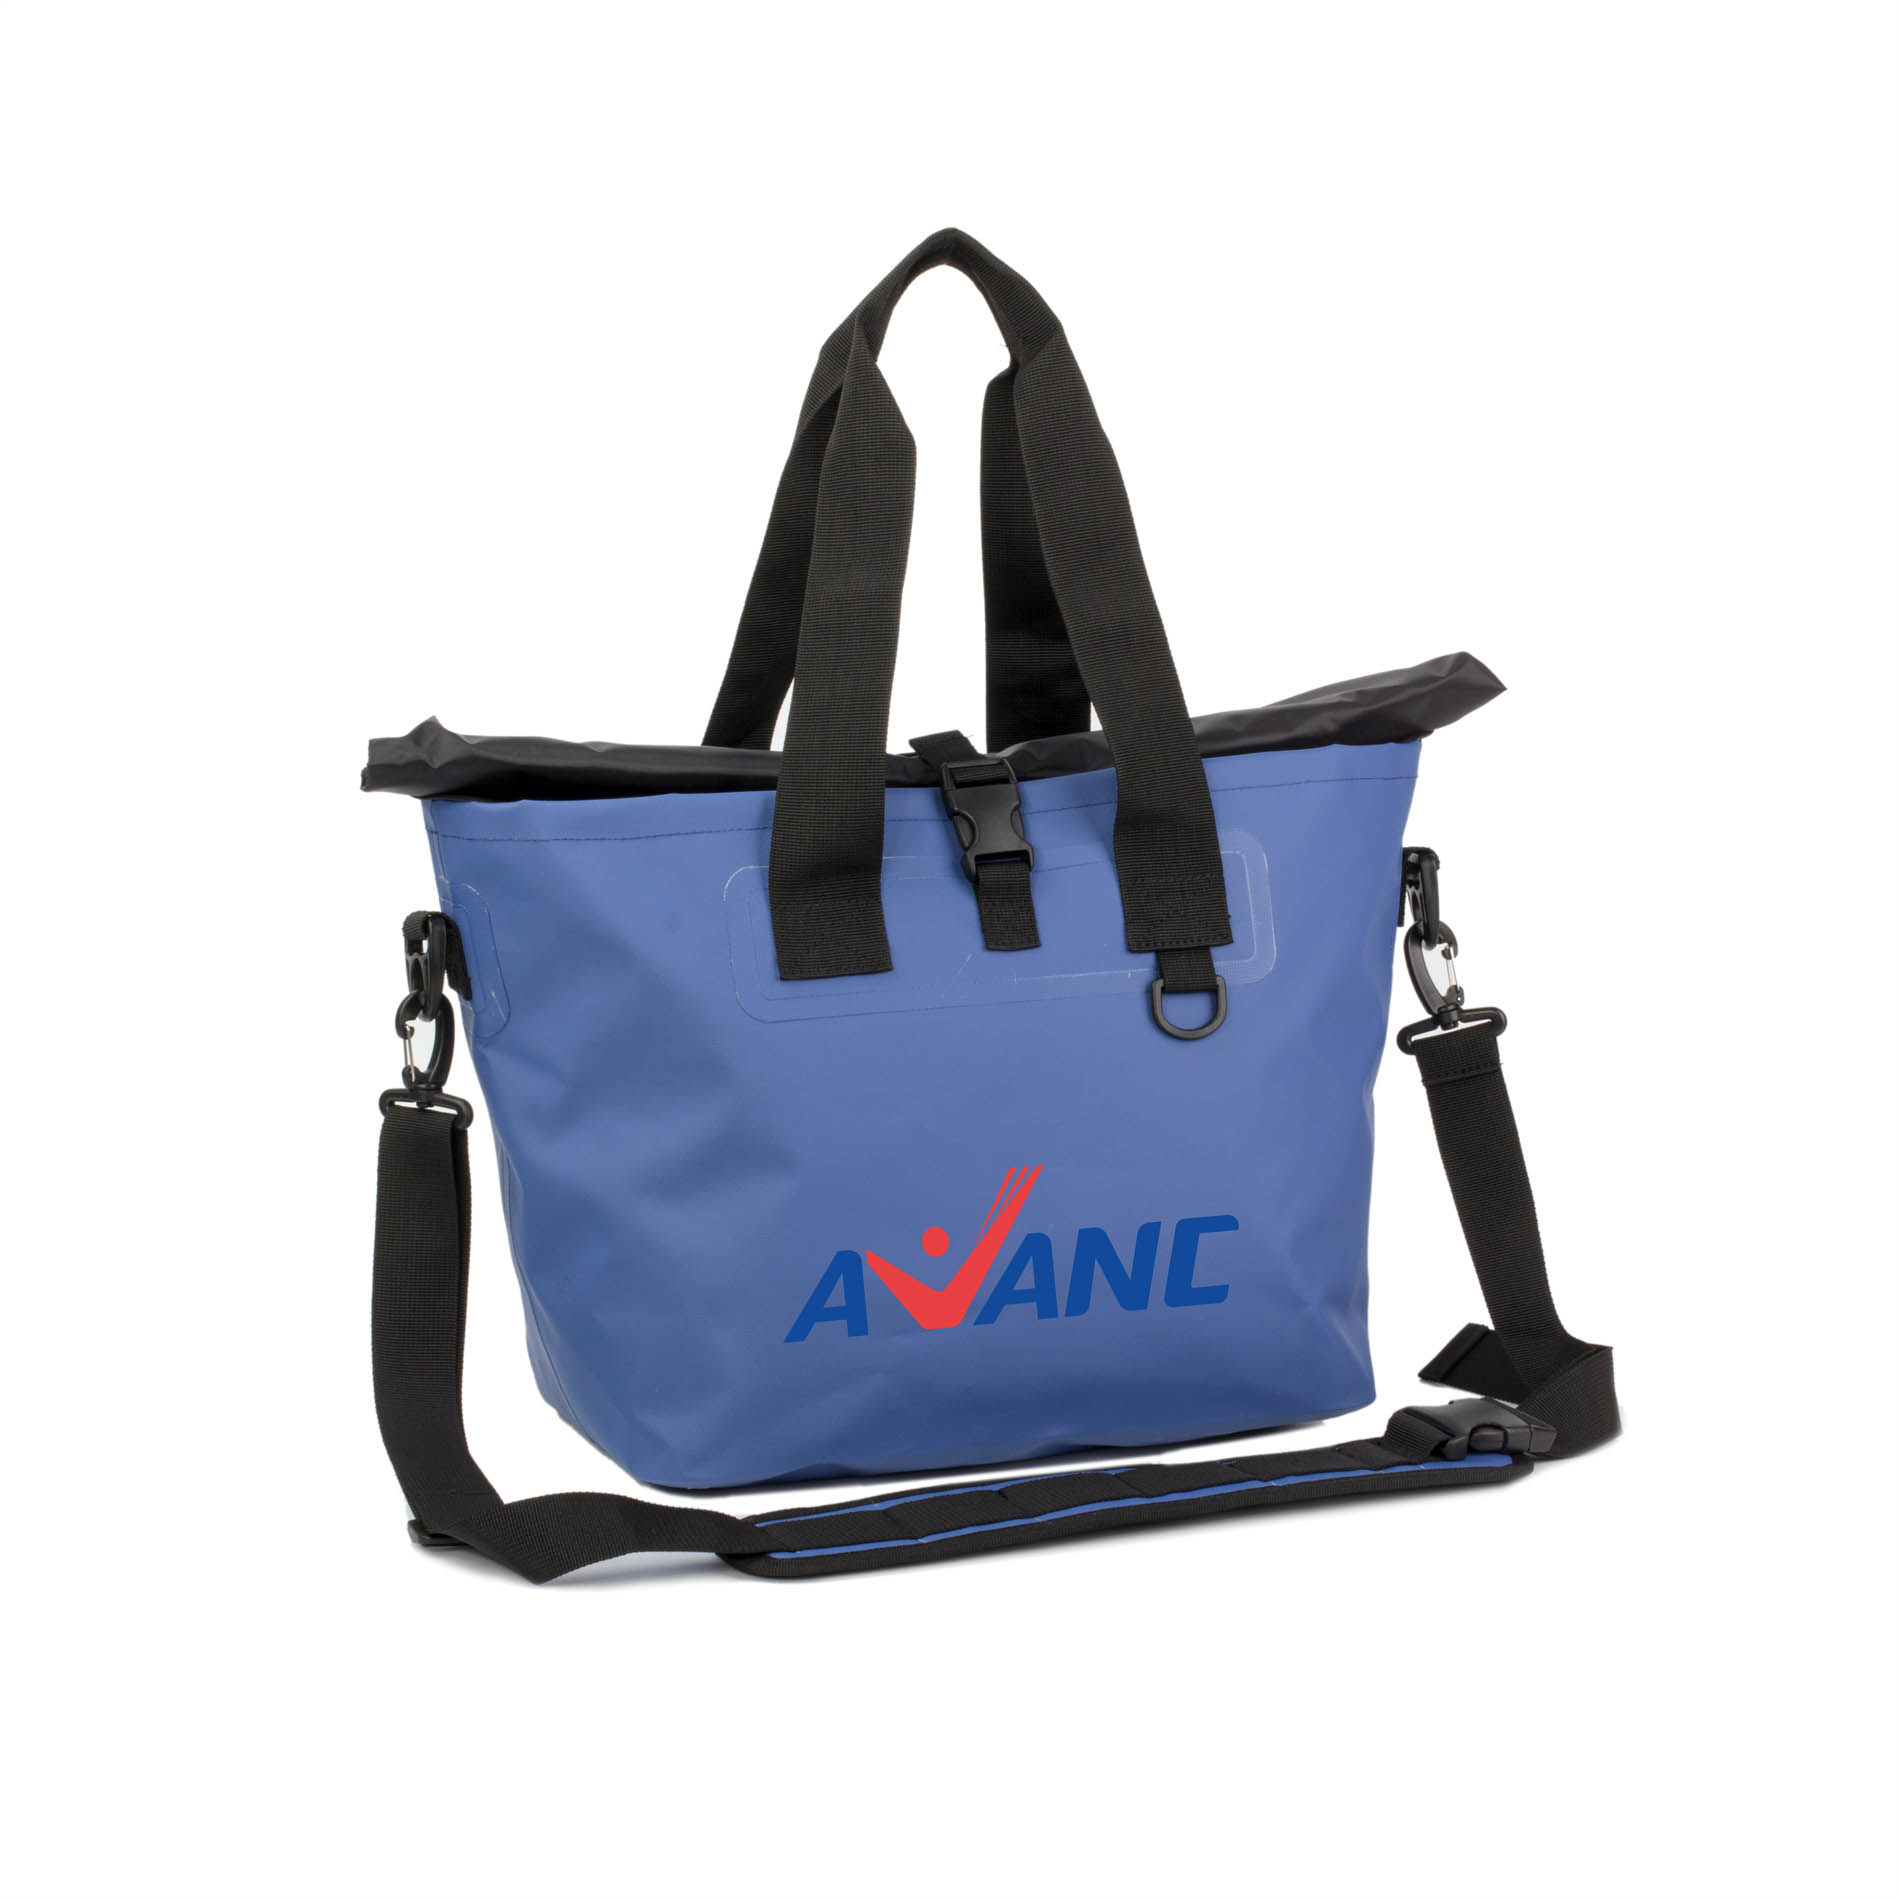 Wateproof Picinic Fashion Lunch Cooler Tote bag 24L